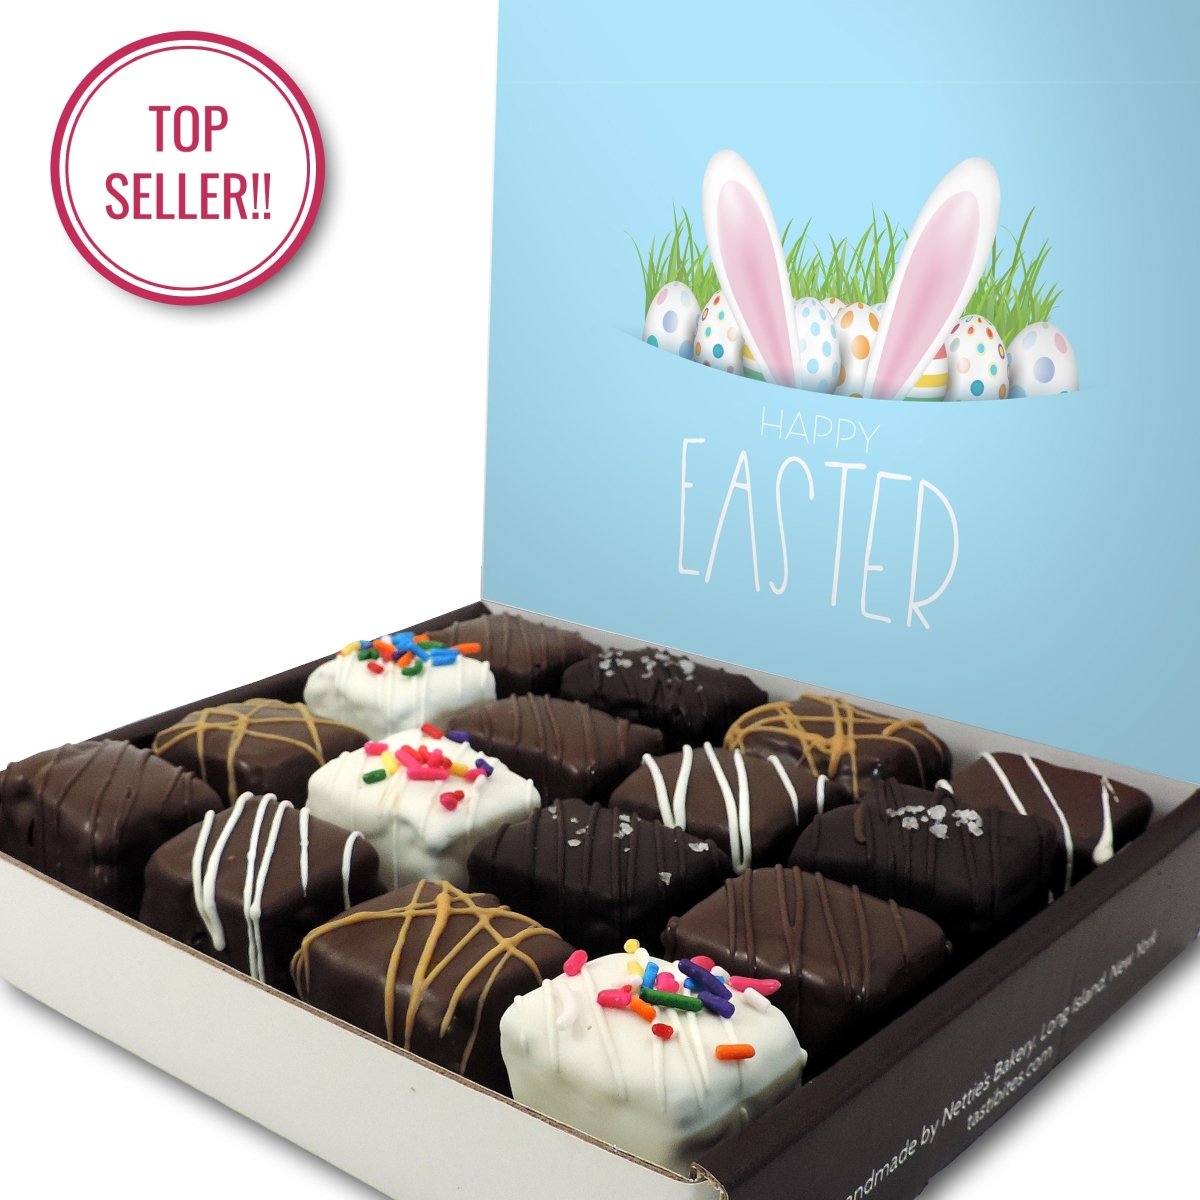 The Happy Easter Box - Nettie's Craft Brownies